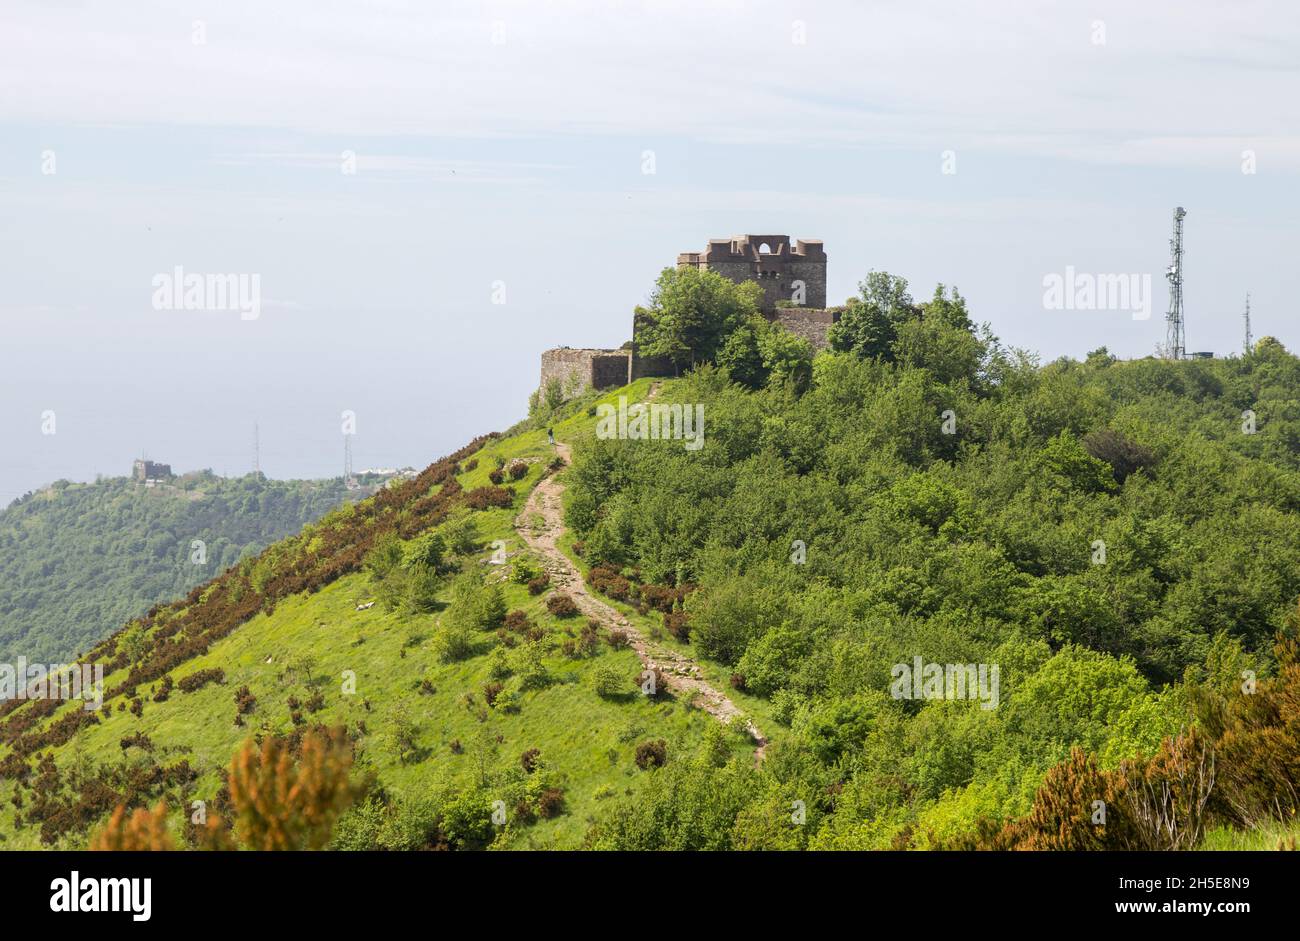 View of Fort Puin in the city of Genoa Mura park trail (Parco delle Mura), Genoa, Italy. Stock Photo